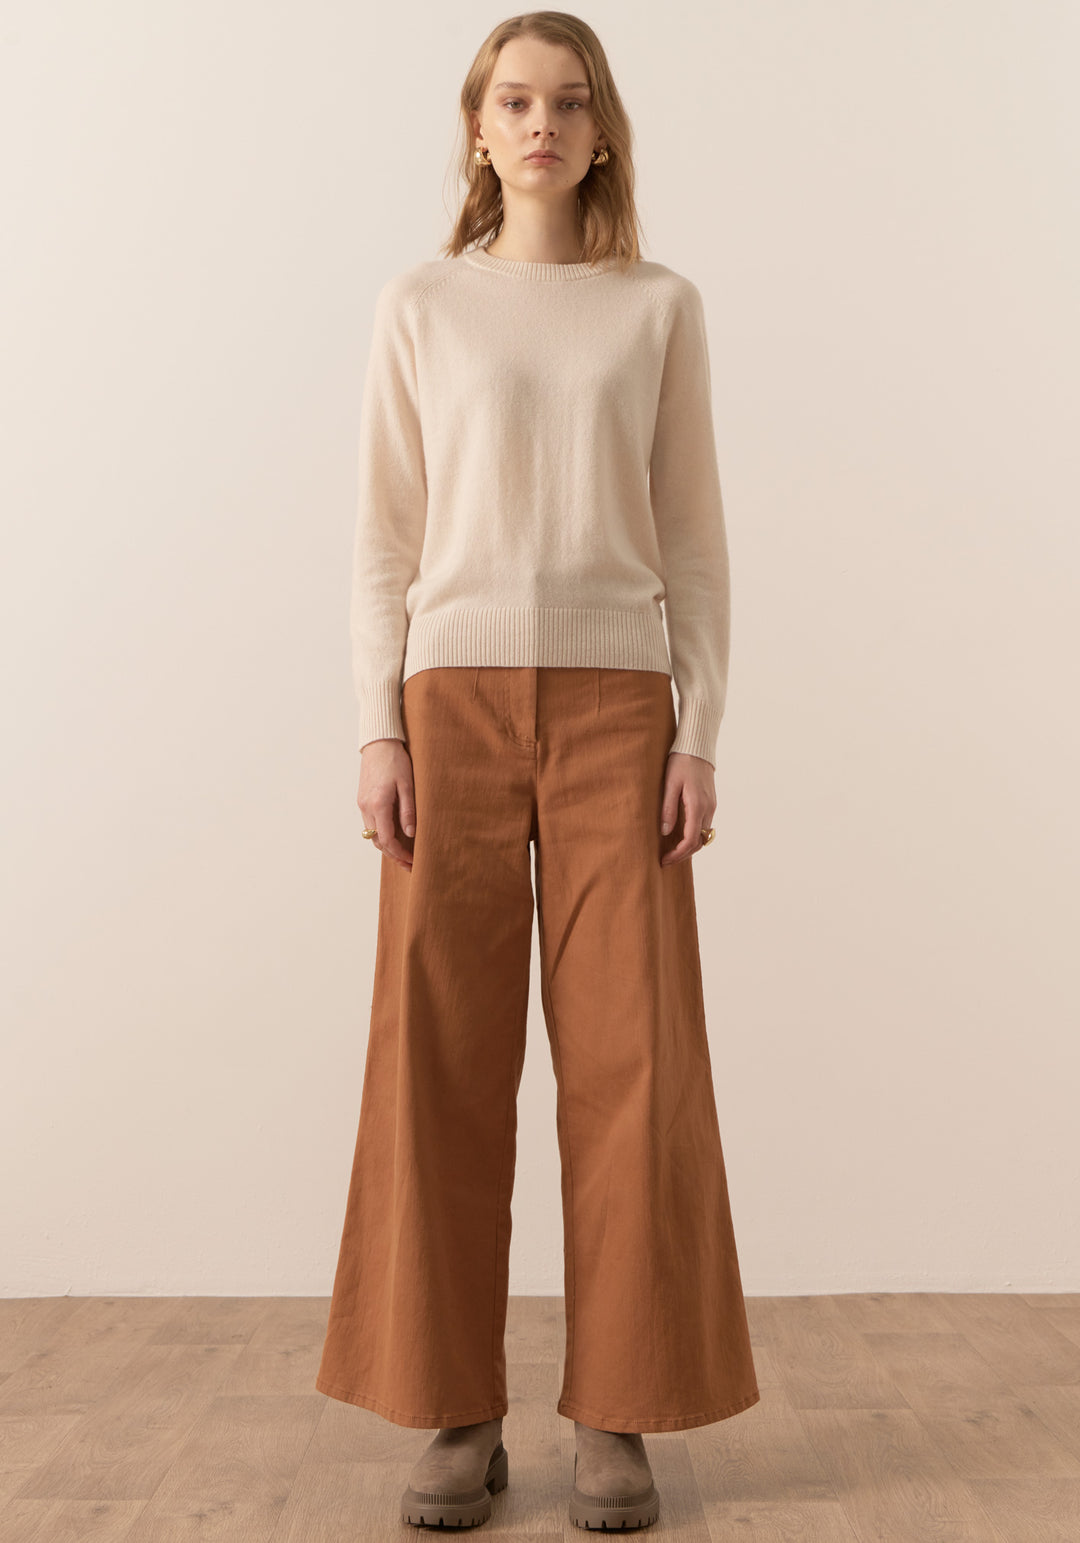 POL Clothing | Willow Cashmere Crew Neck Knit | Shell